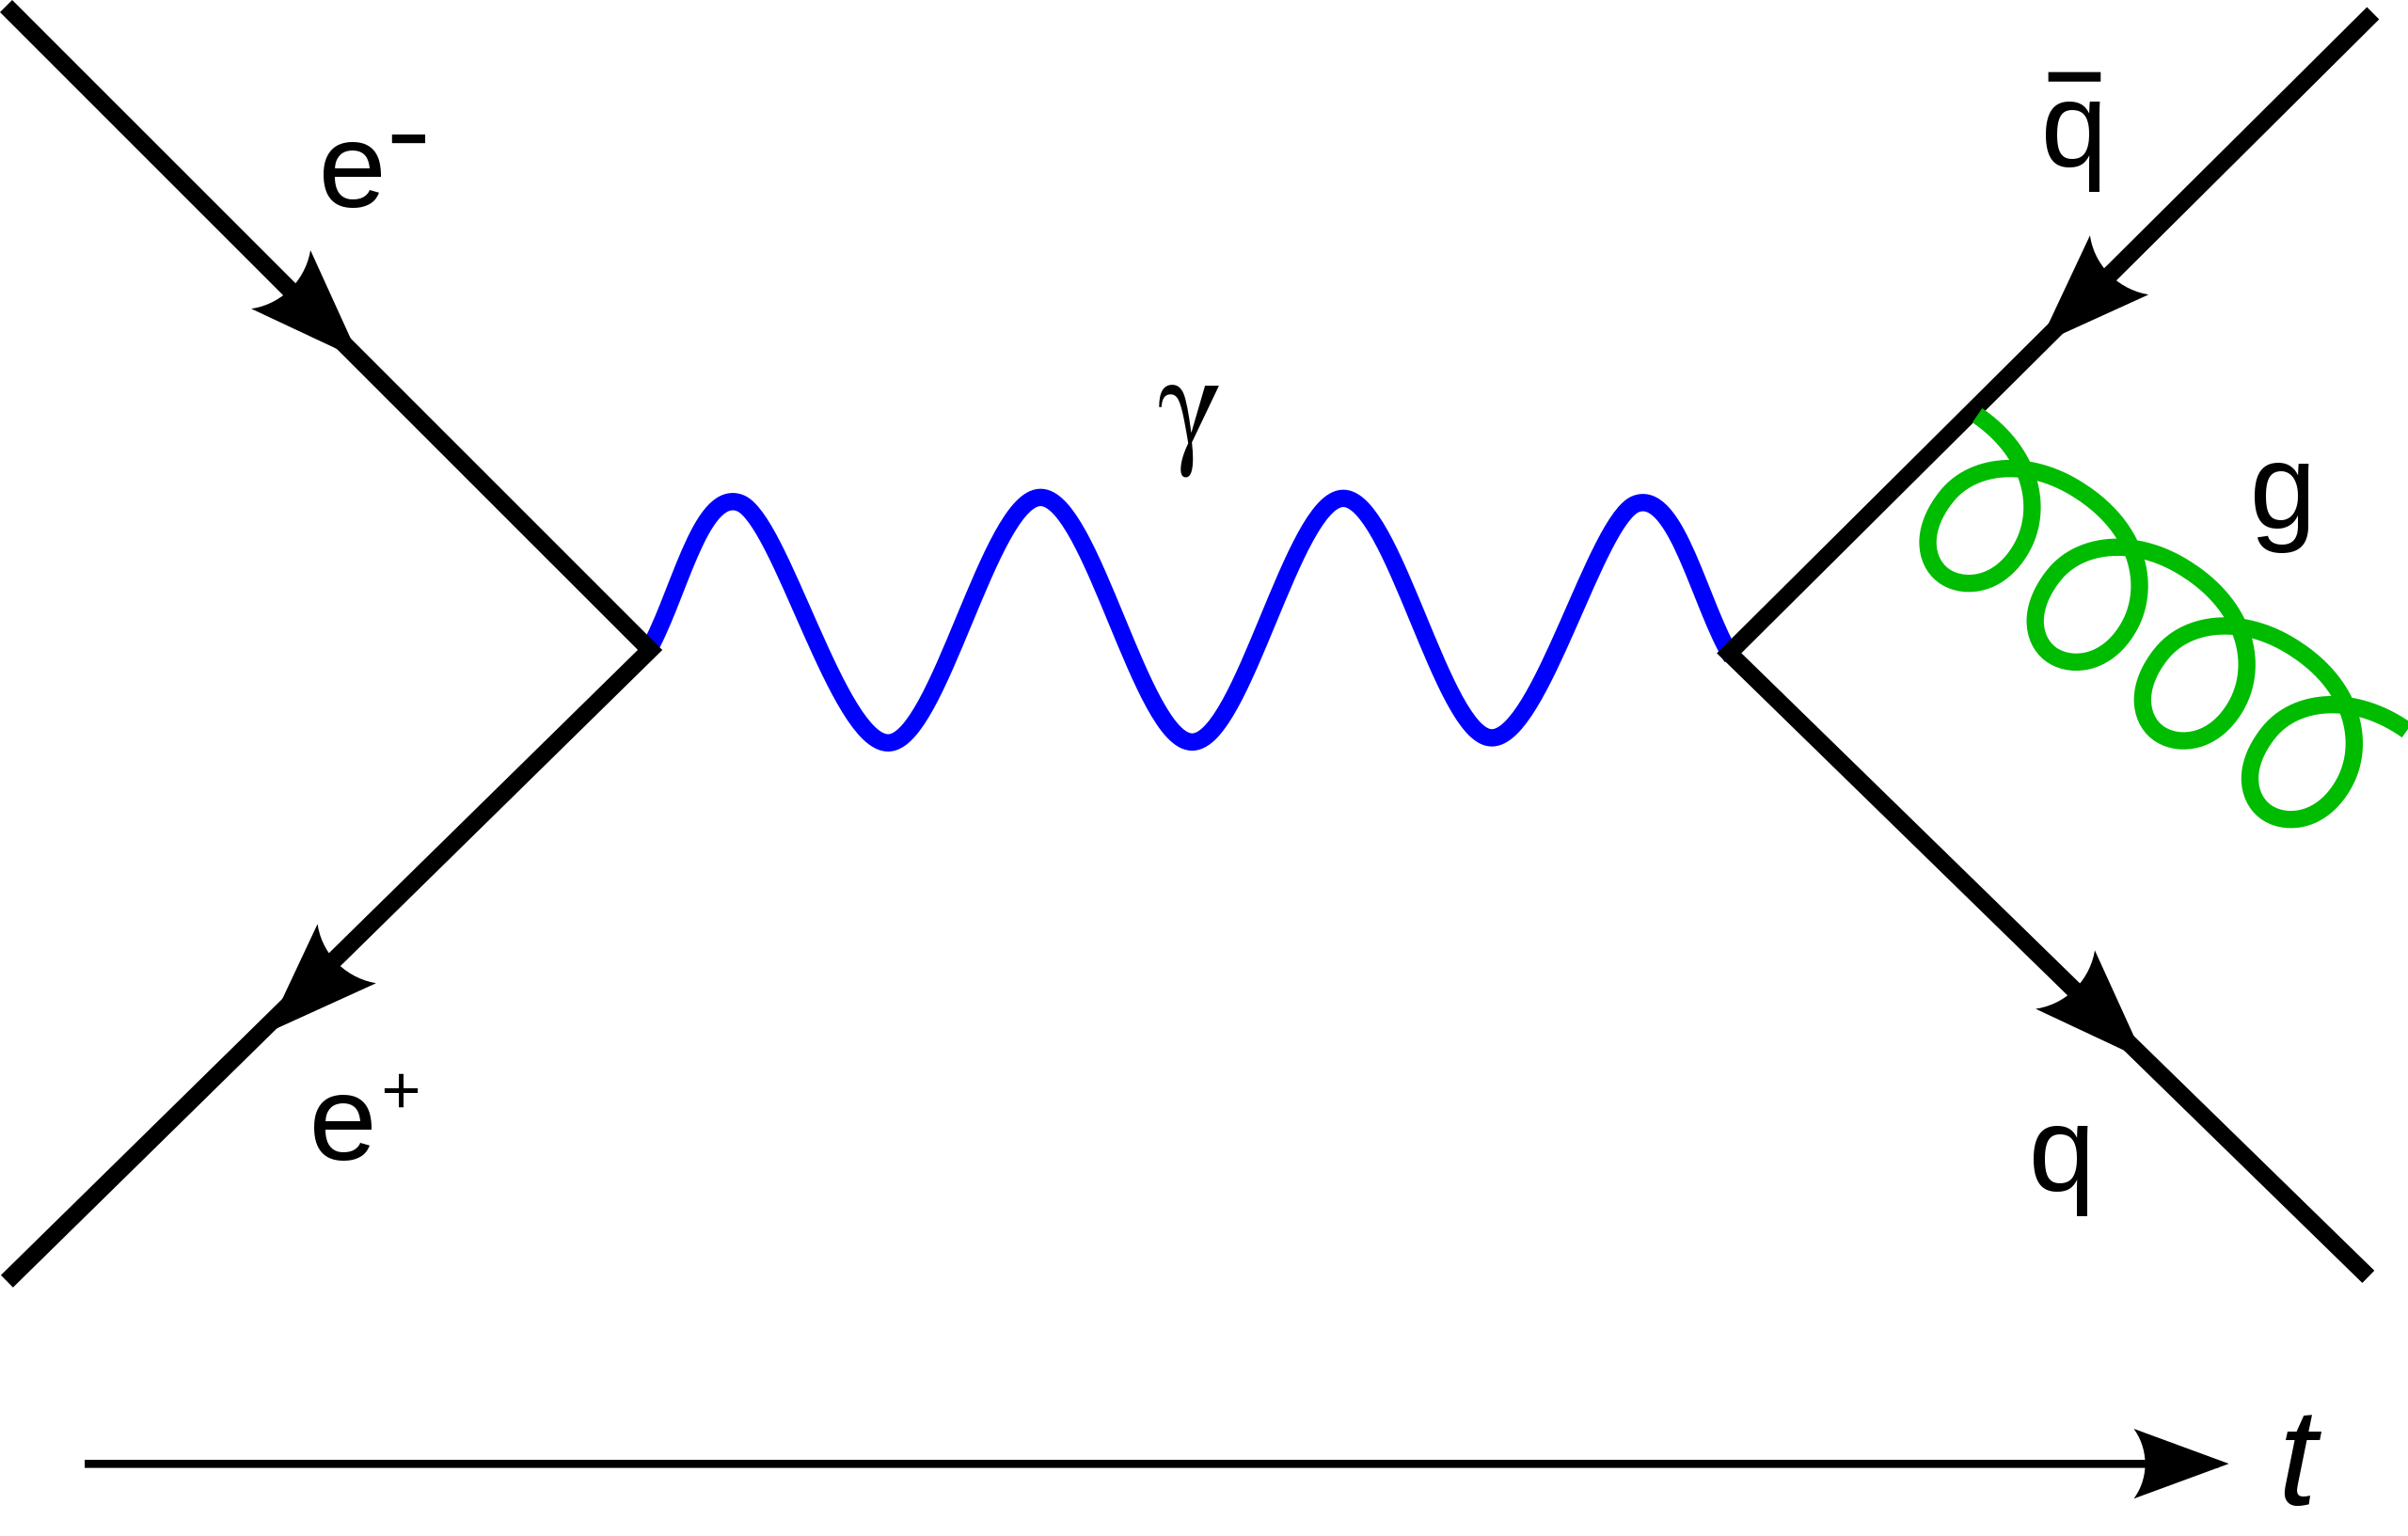 A Feynman diagram showing the radiation of a gluon when an electron and positron are annihilated. (Image: Public Domain)